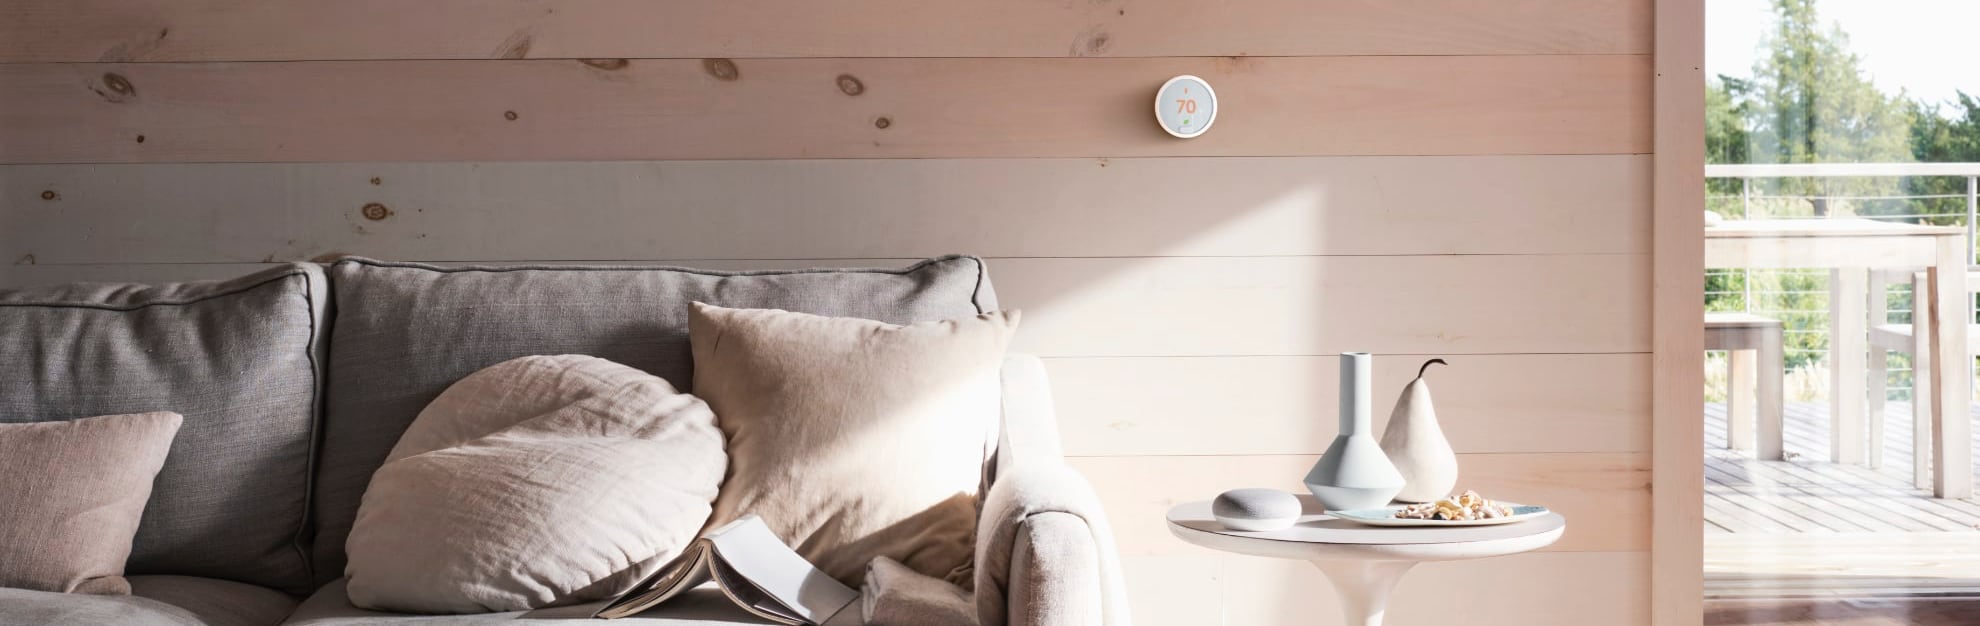 Vivint Home Automation in Wausau